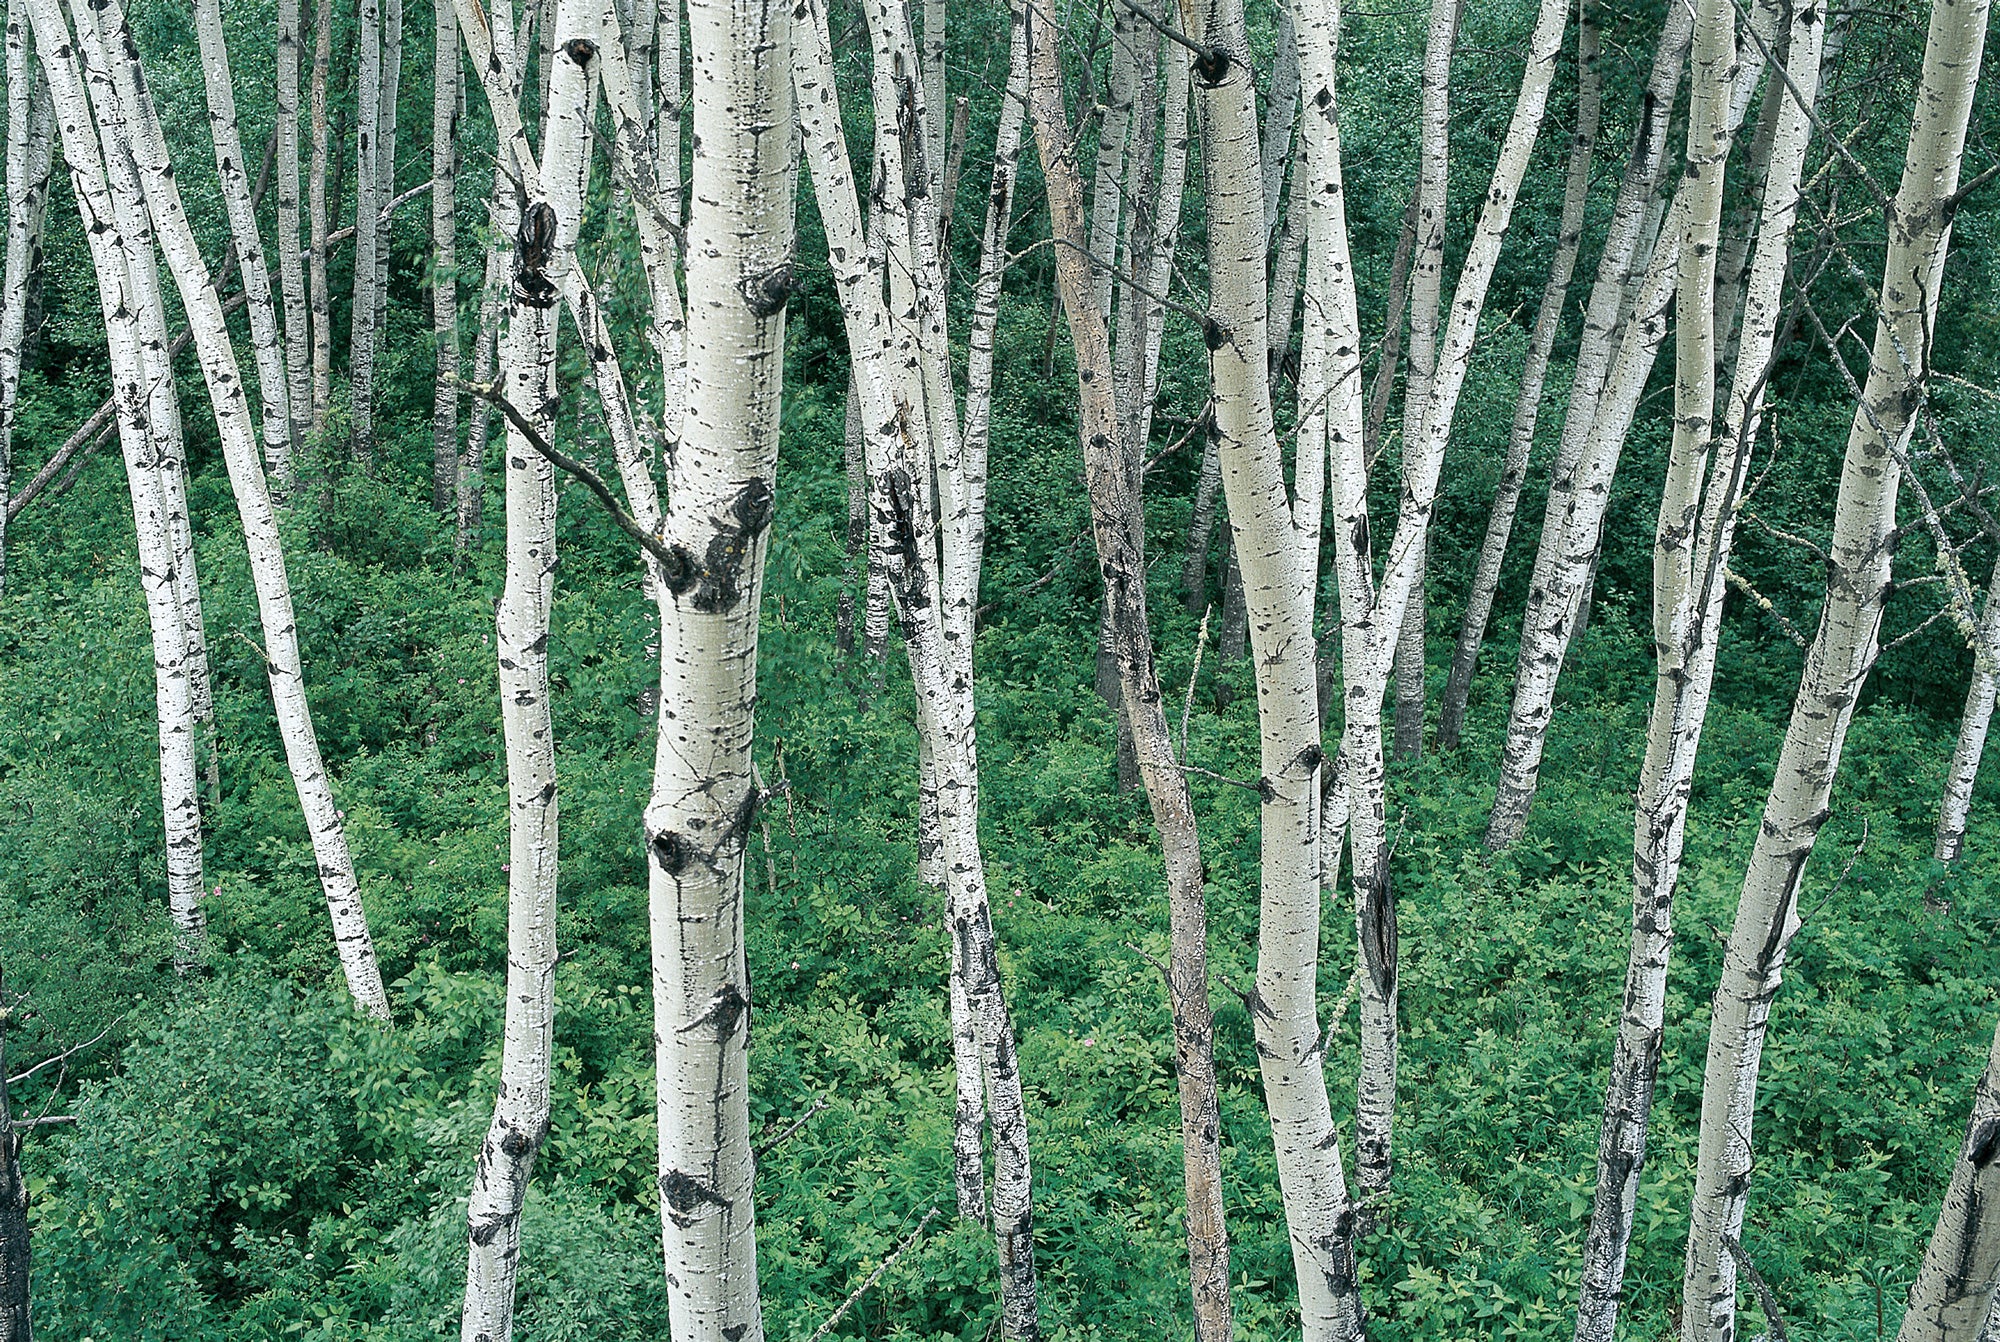 Rows of aspen trees in the woods. End of image description.